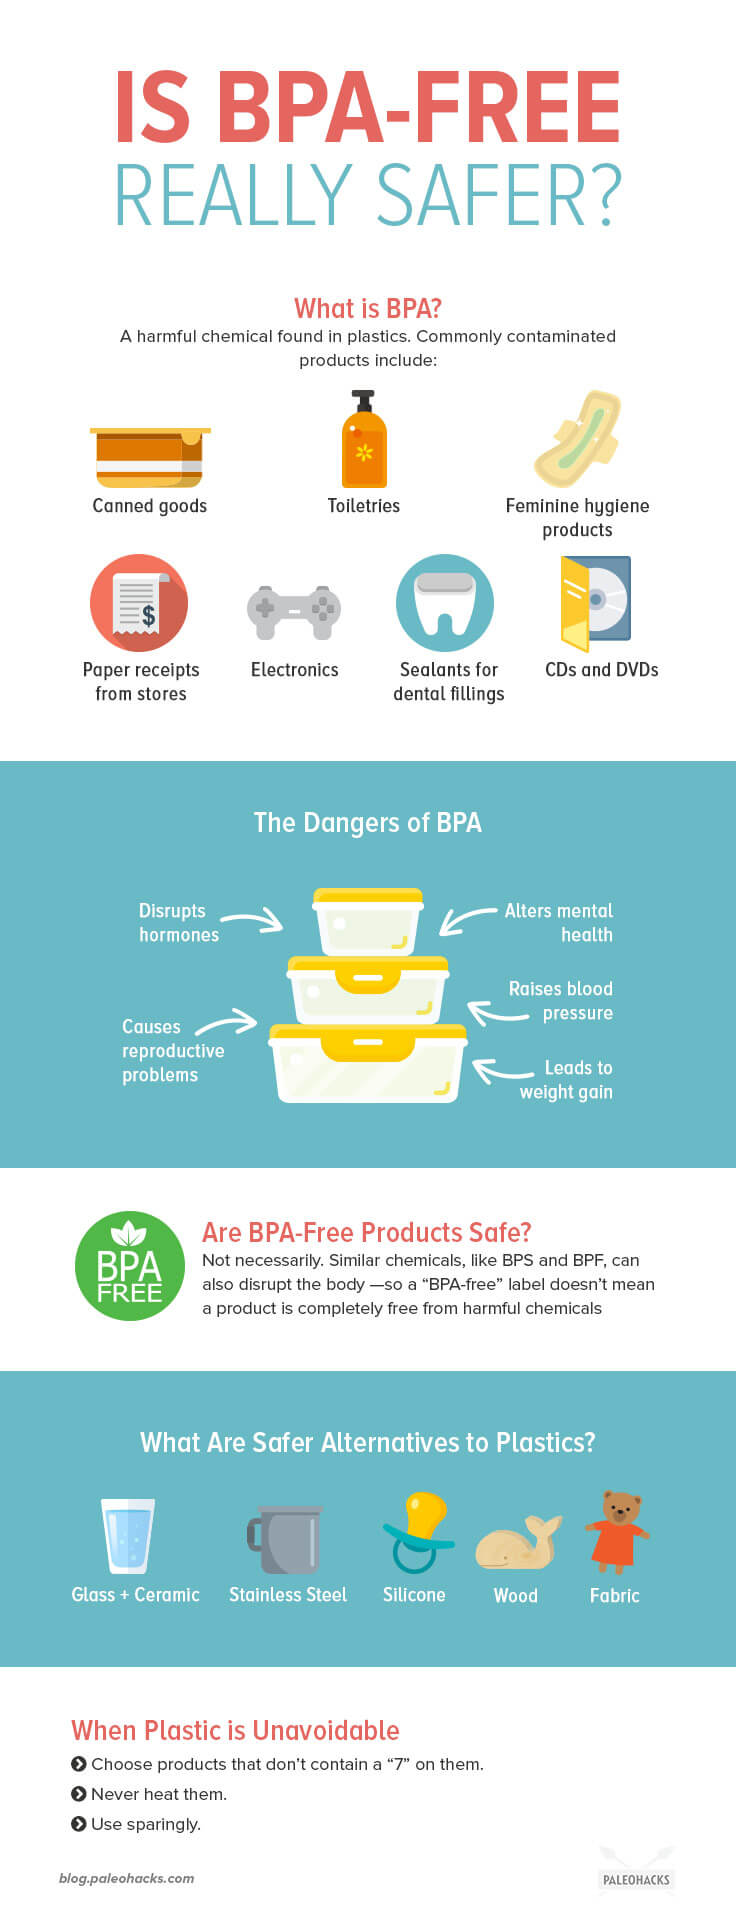 “BPA-free” is a buzzword that may fool you into thinking you’re getting a safer, better product. Unfortunately, this label is not always what it seems.